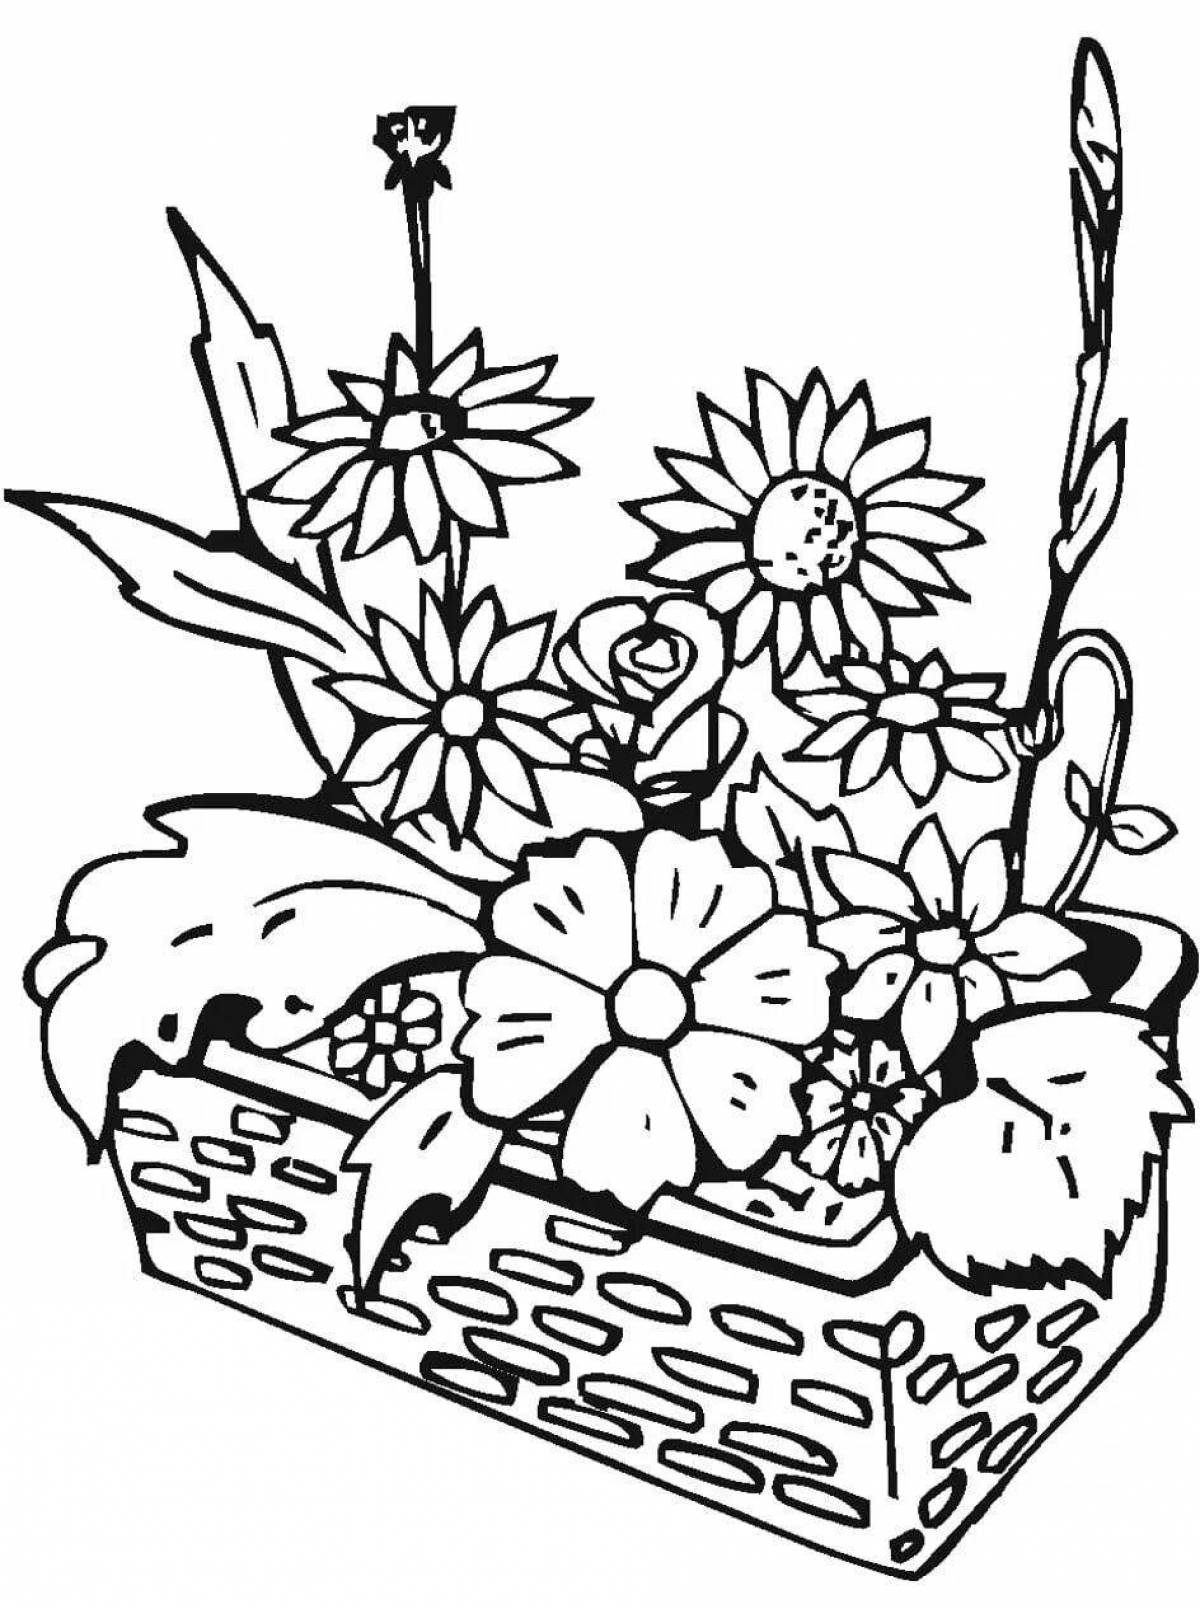 Playful composition coloring page